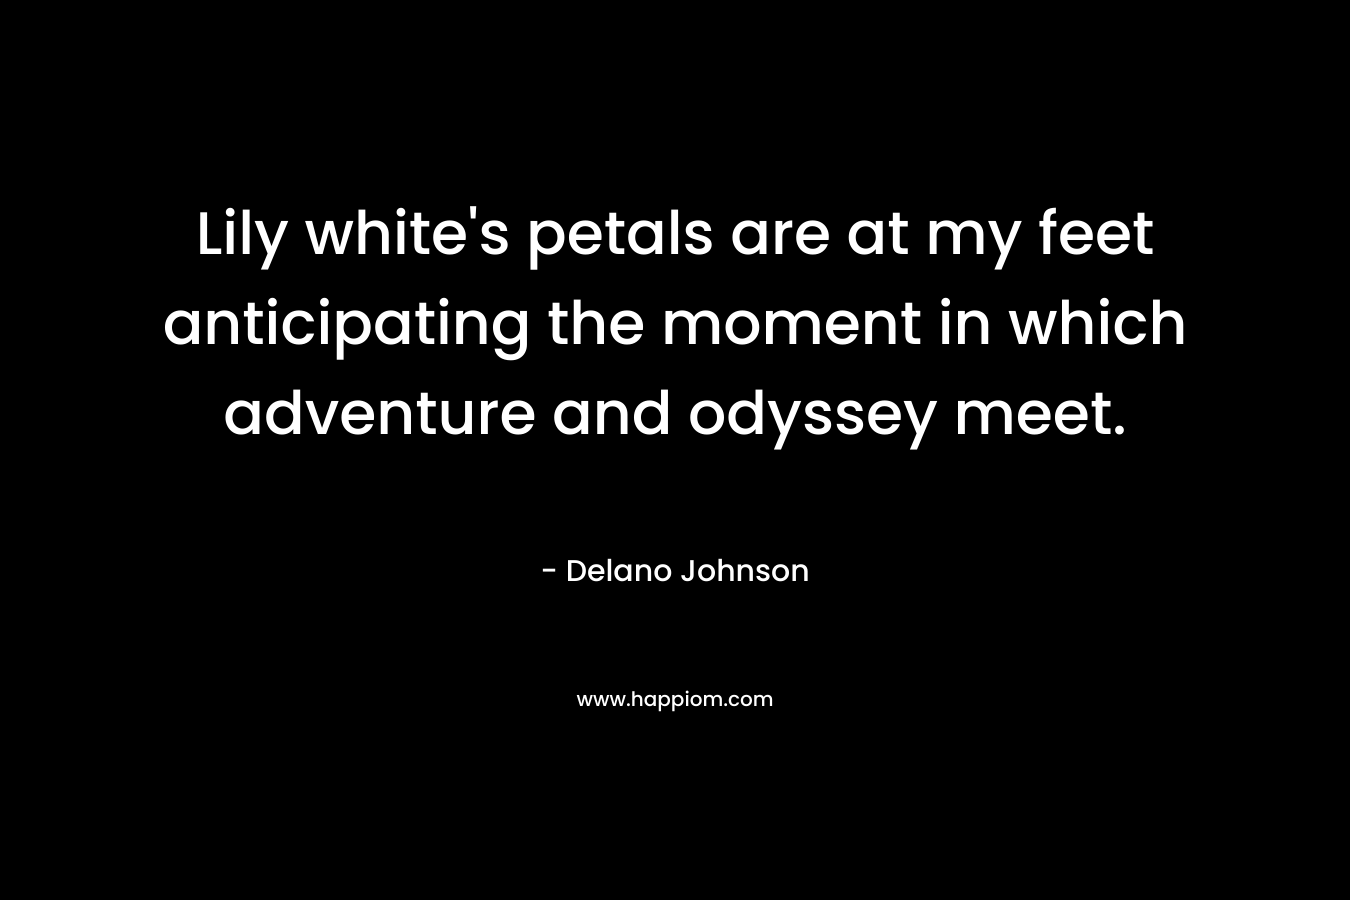 Lily white’s petals are at my feet anticipating the moment in which adventure and odyssey meet. – Delano Johnson